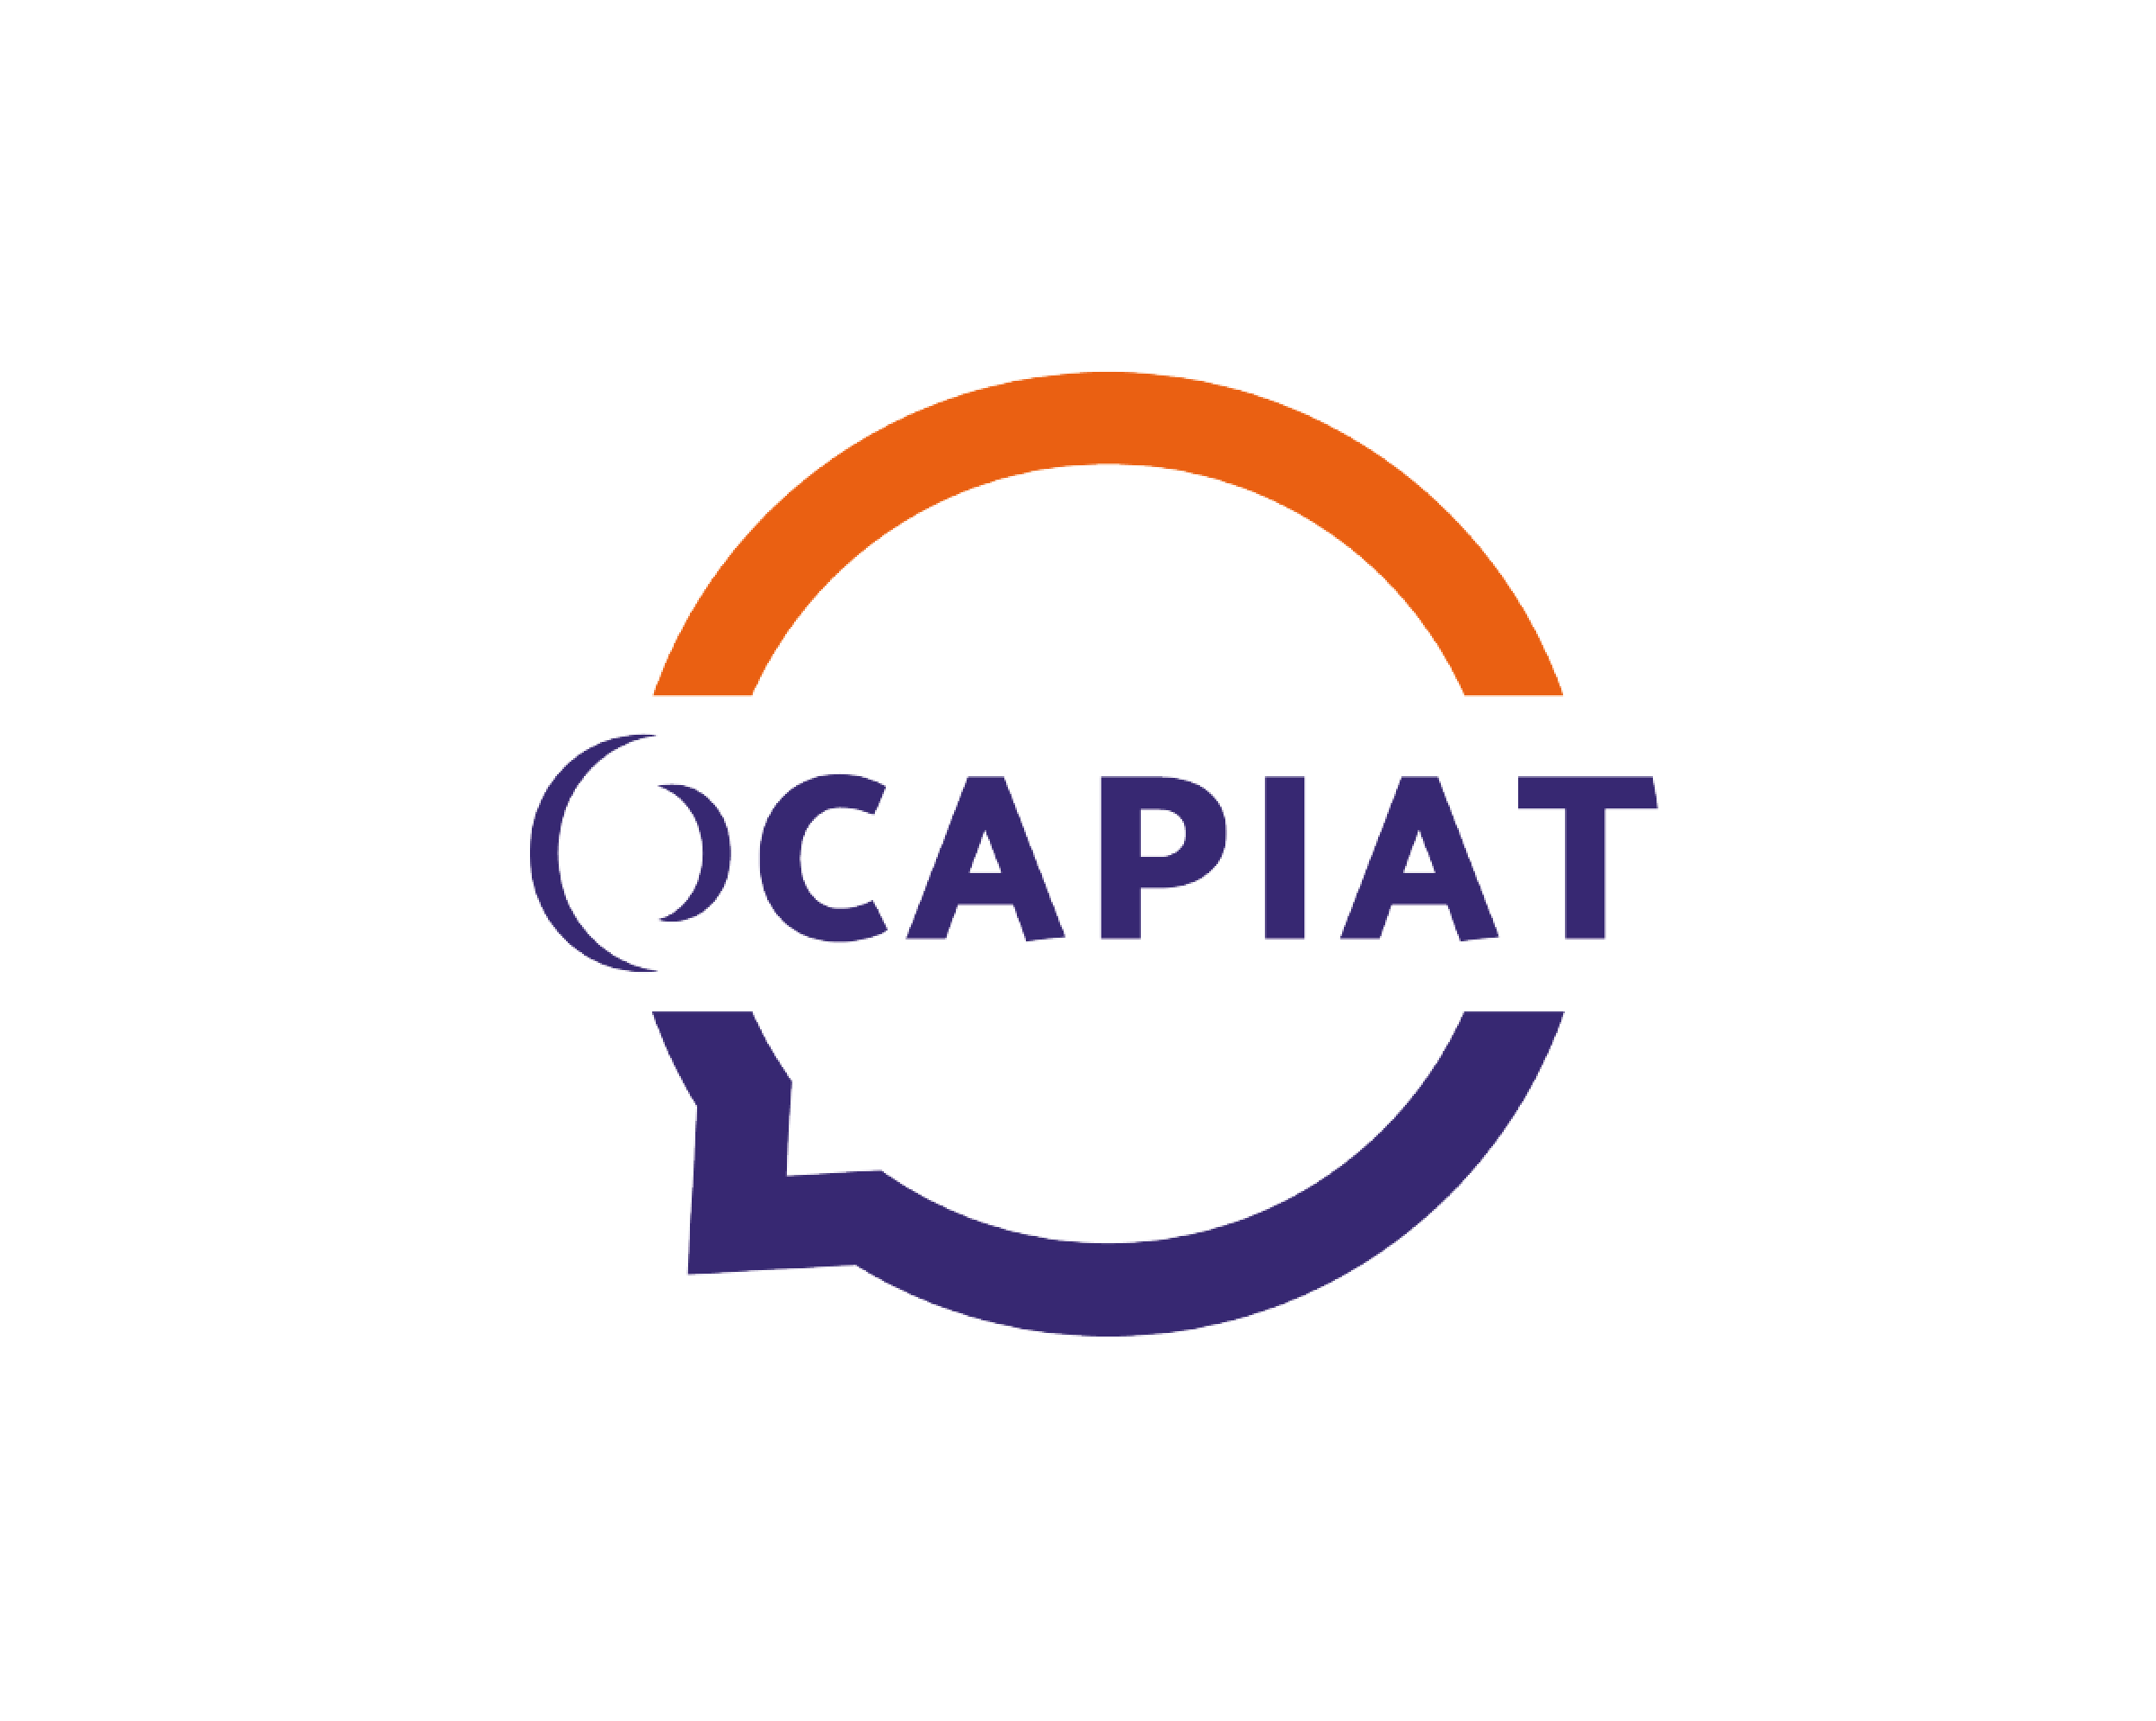 OCAPIAT - agriculture, pêche, agroalimentaire